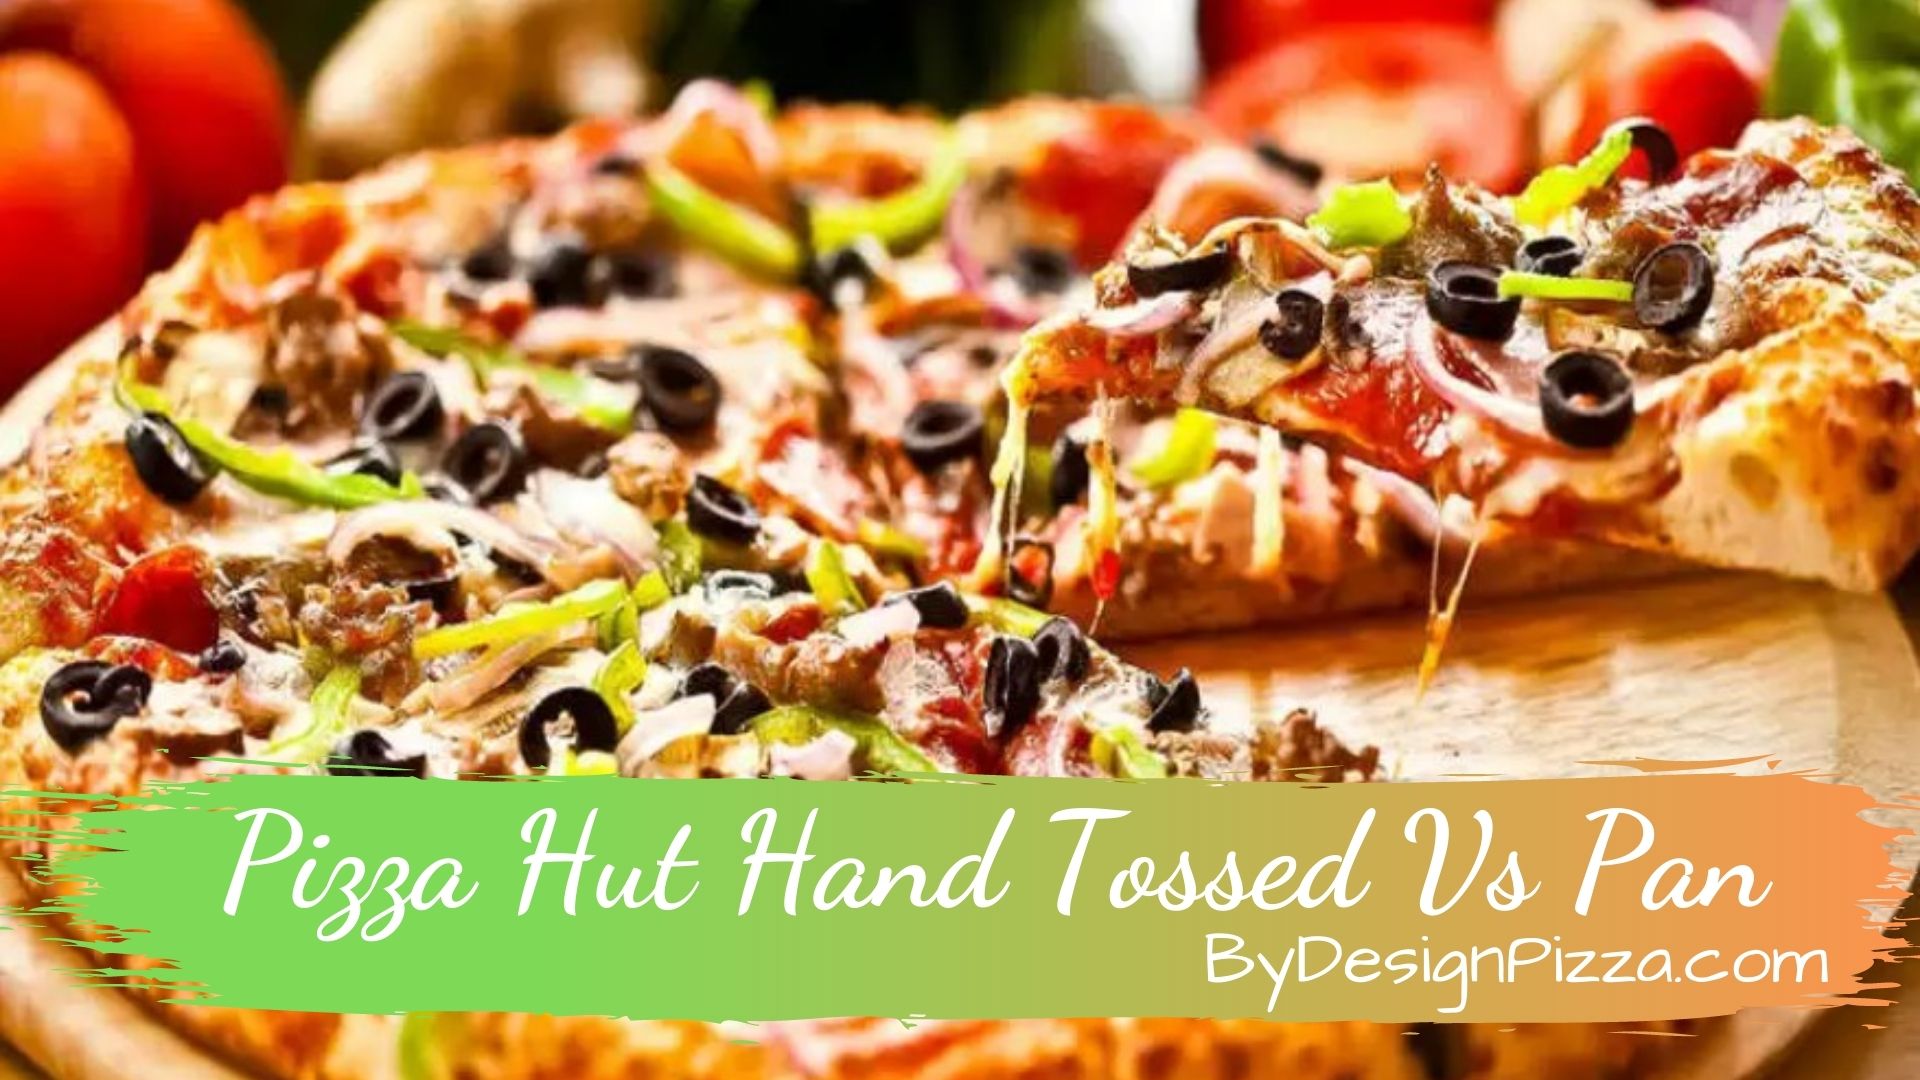 Pizza hut hand stretched vs pan crust